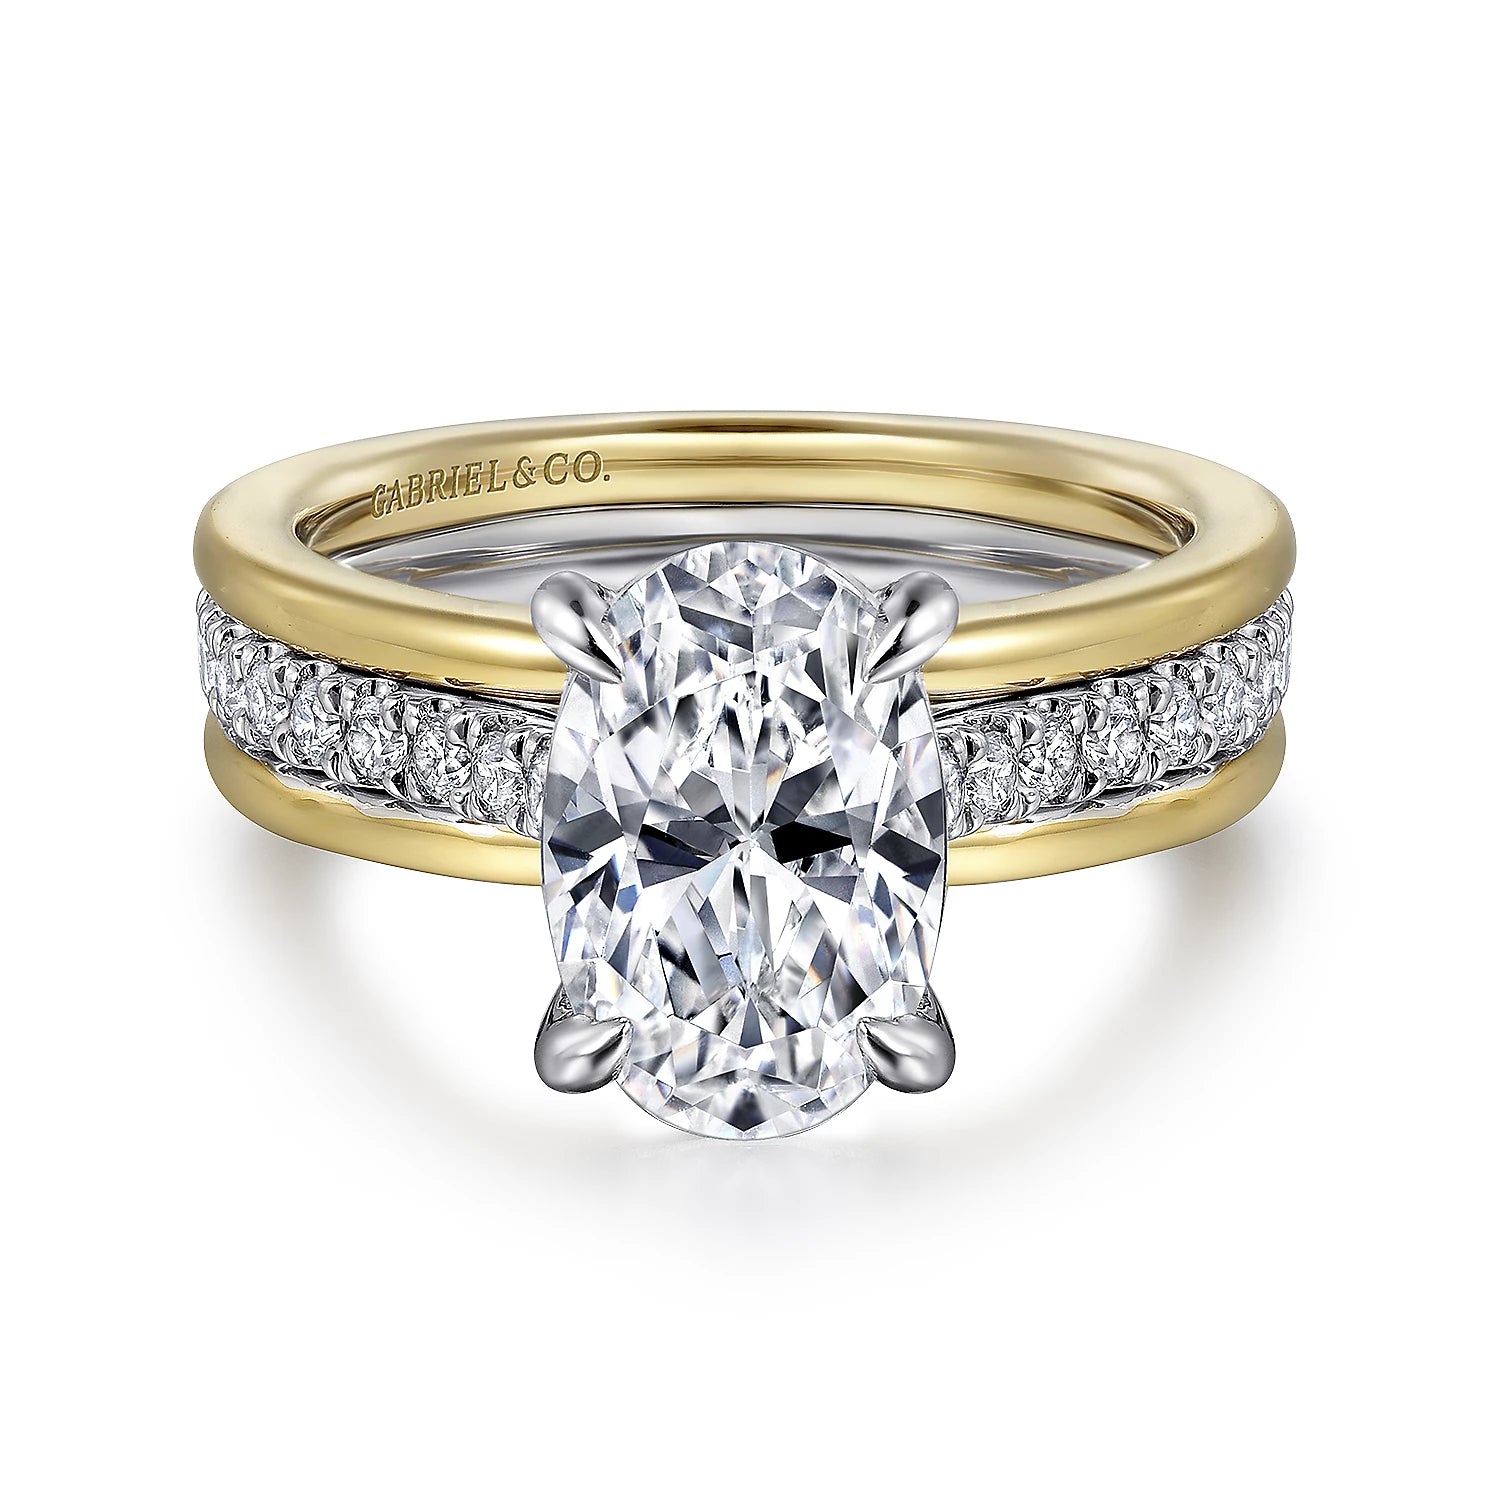 Dancing Diamonds in Motion 14kt Gold Diamond Ring with 0.32 Carats t.w -  Jewelry Factory - North Hollywood, CA